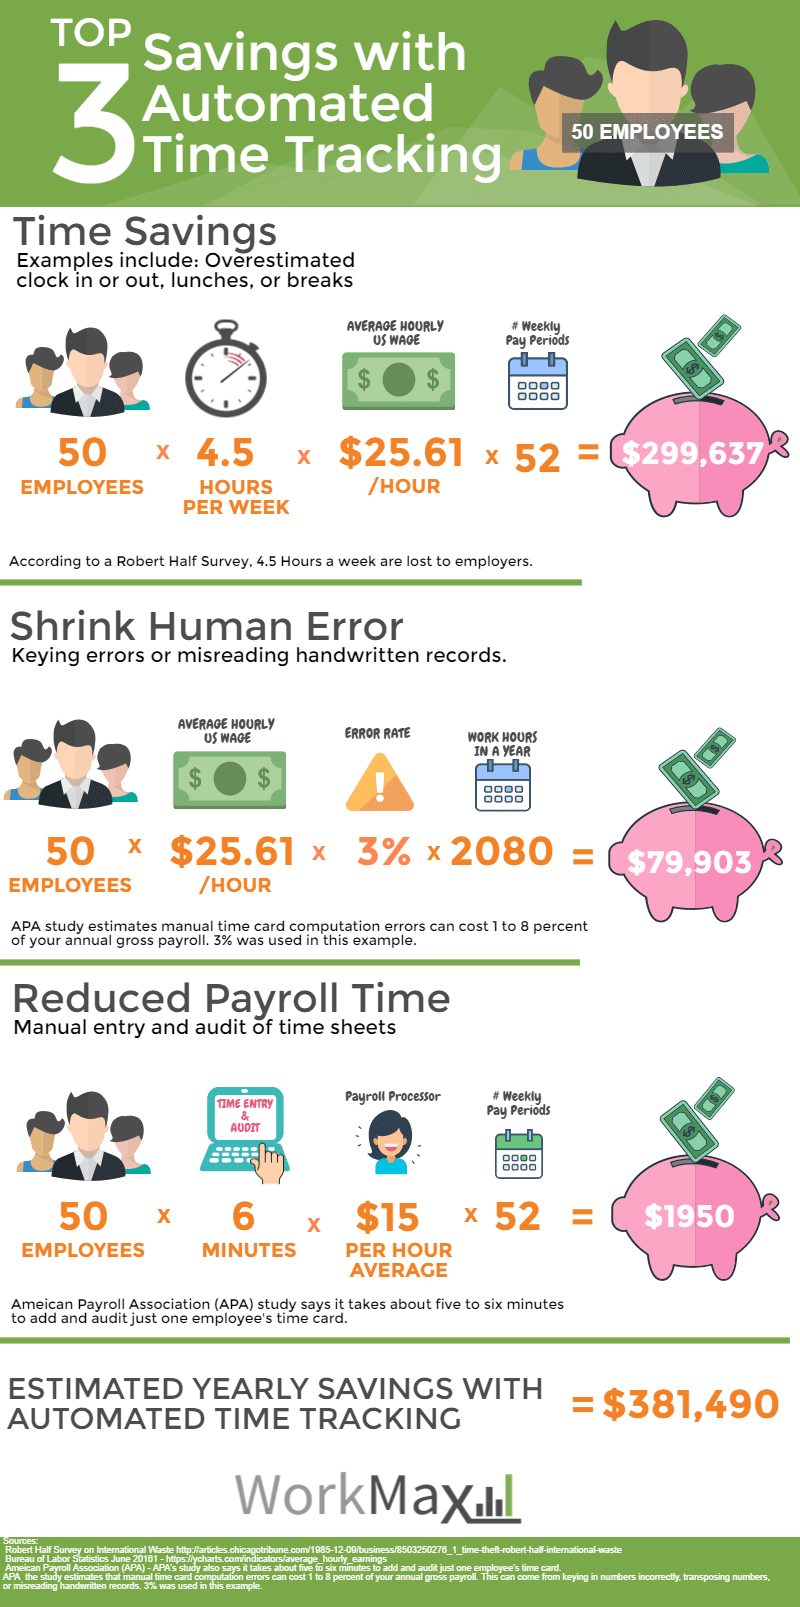 Top 3 Cost Savings of Automated Employee Time Tracking 